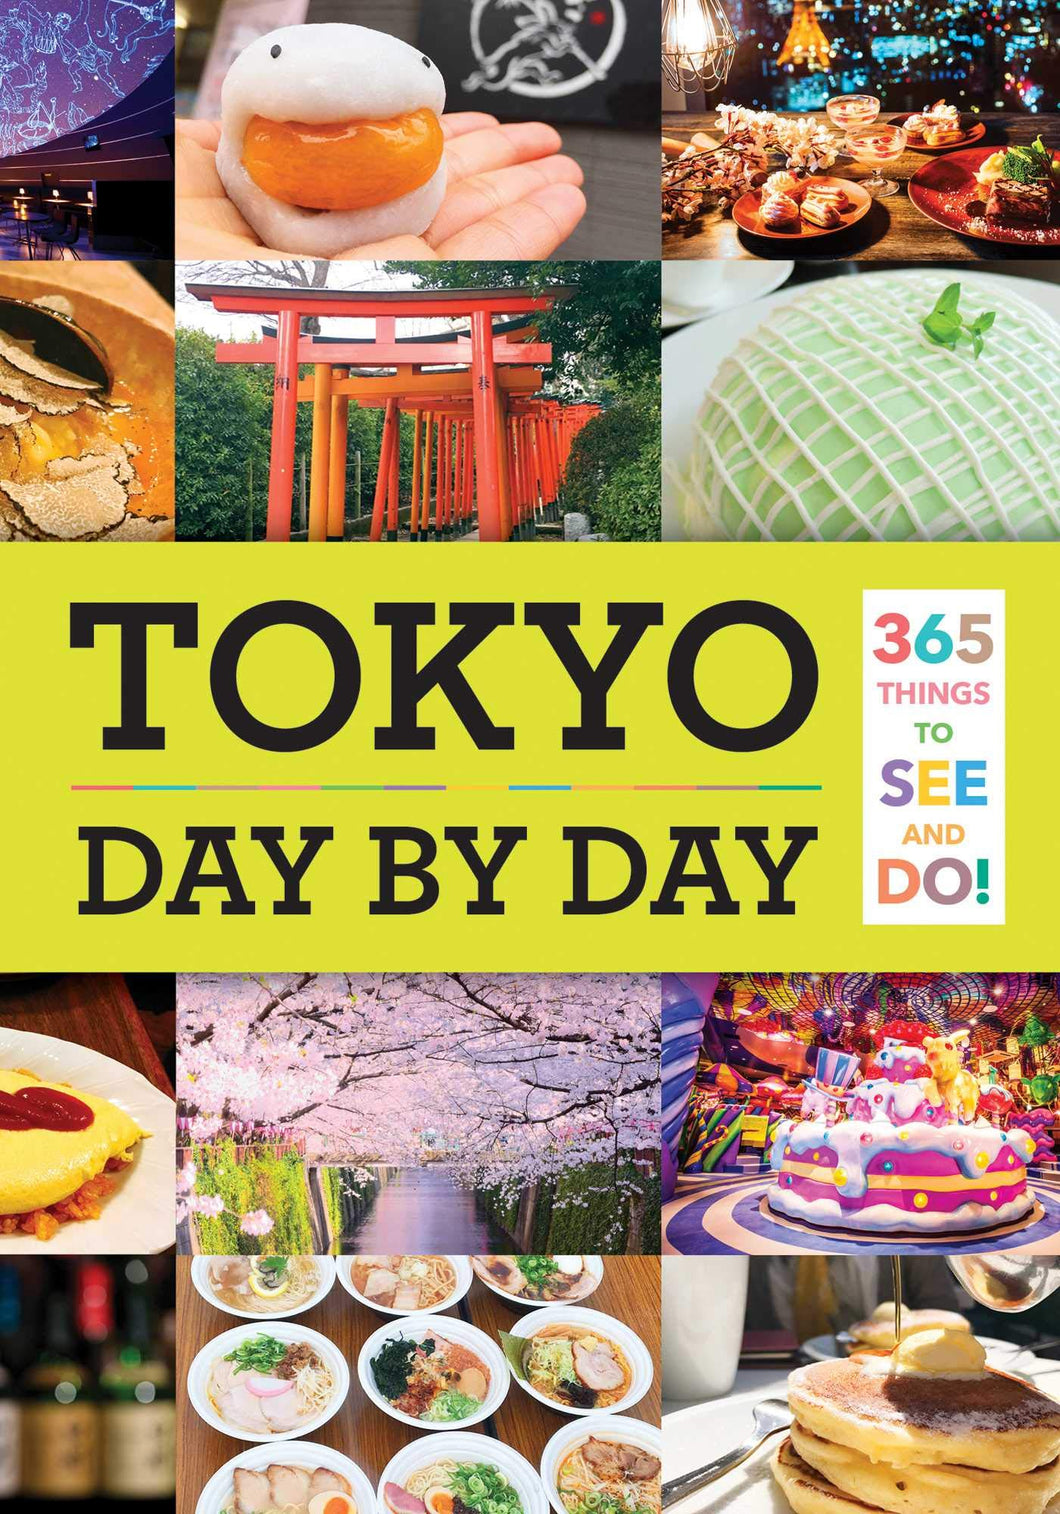 Tokyo Day By Day 365 Things To See And Do!